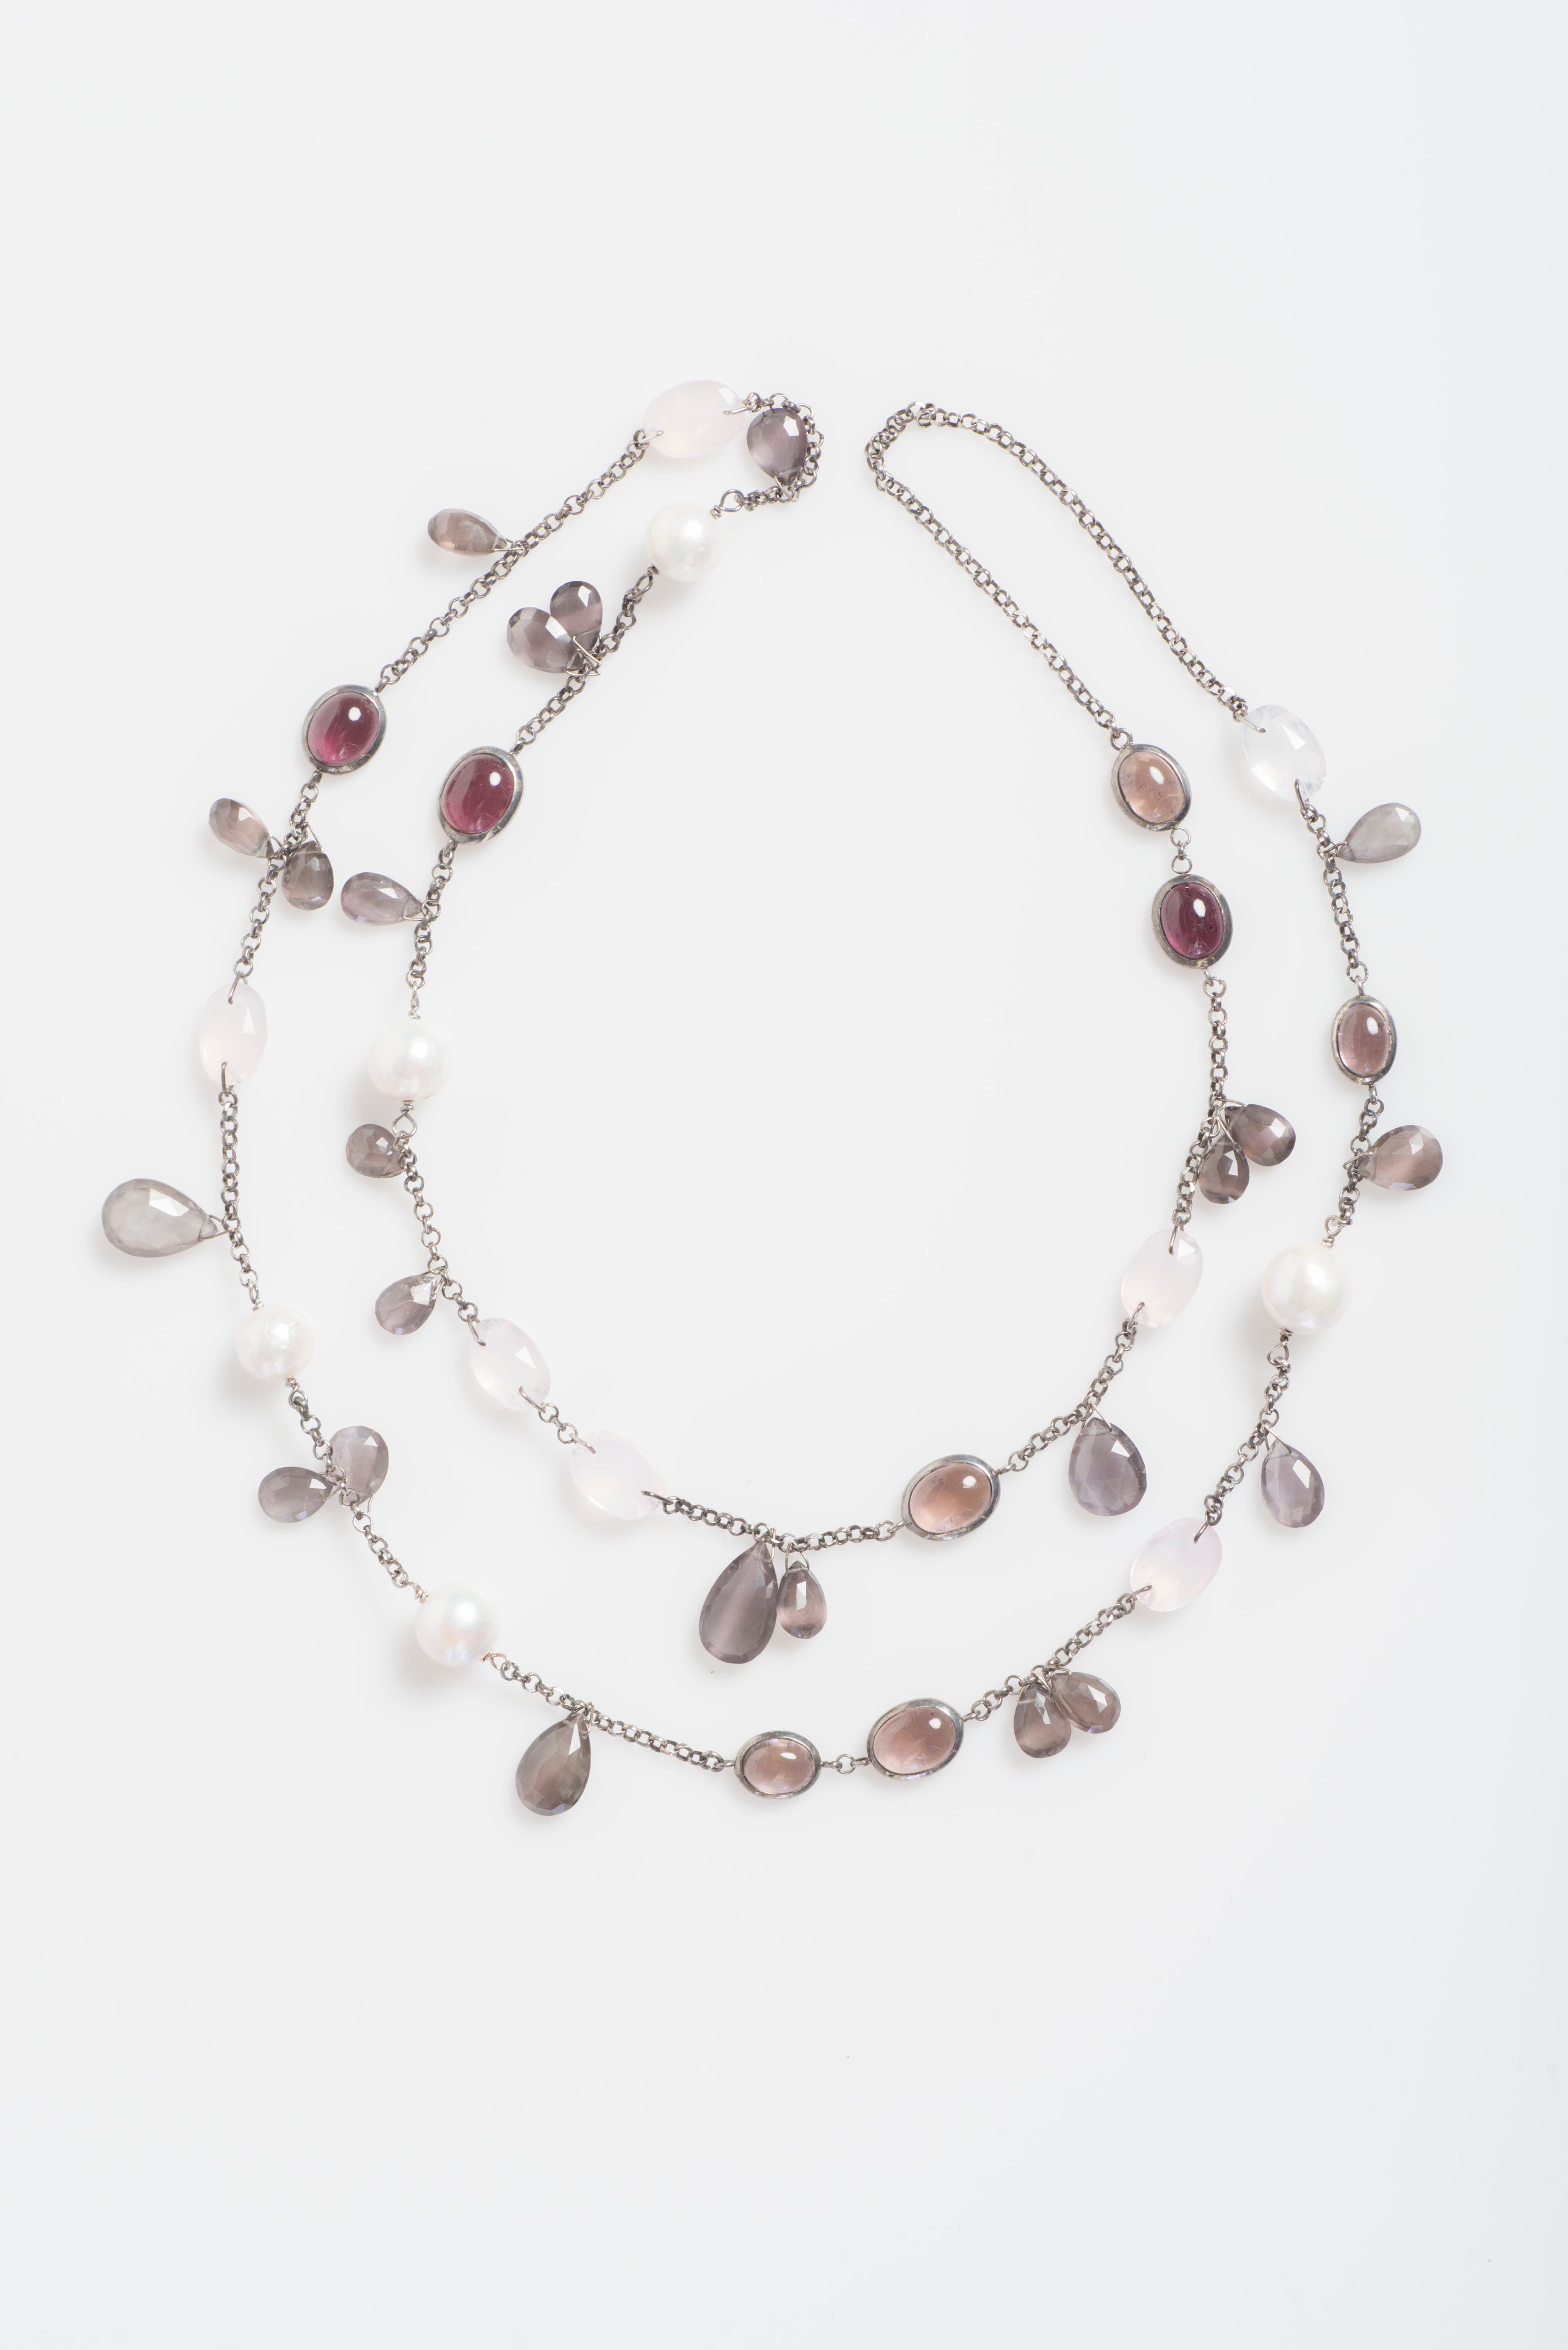 Amethyst, Pink Tourmaline, Moonstones and Pearl Necklace image